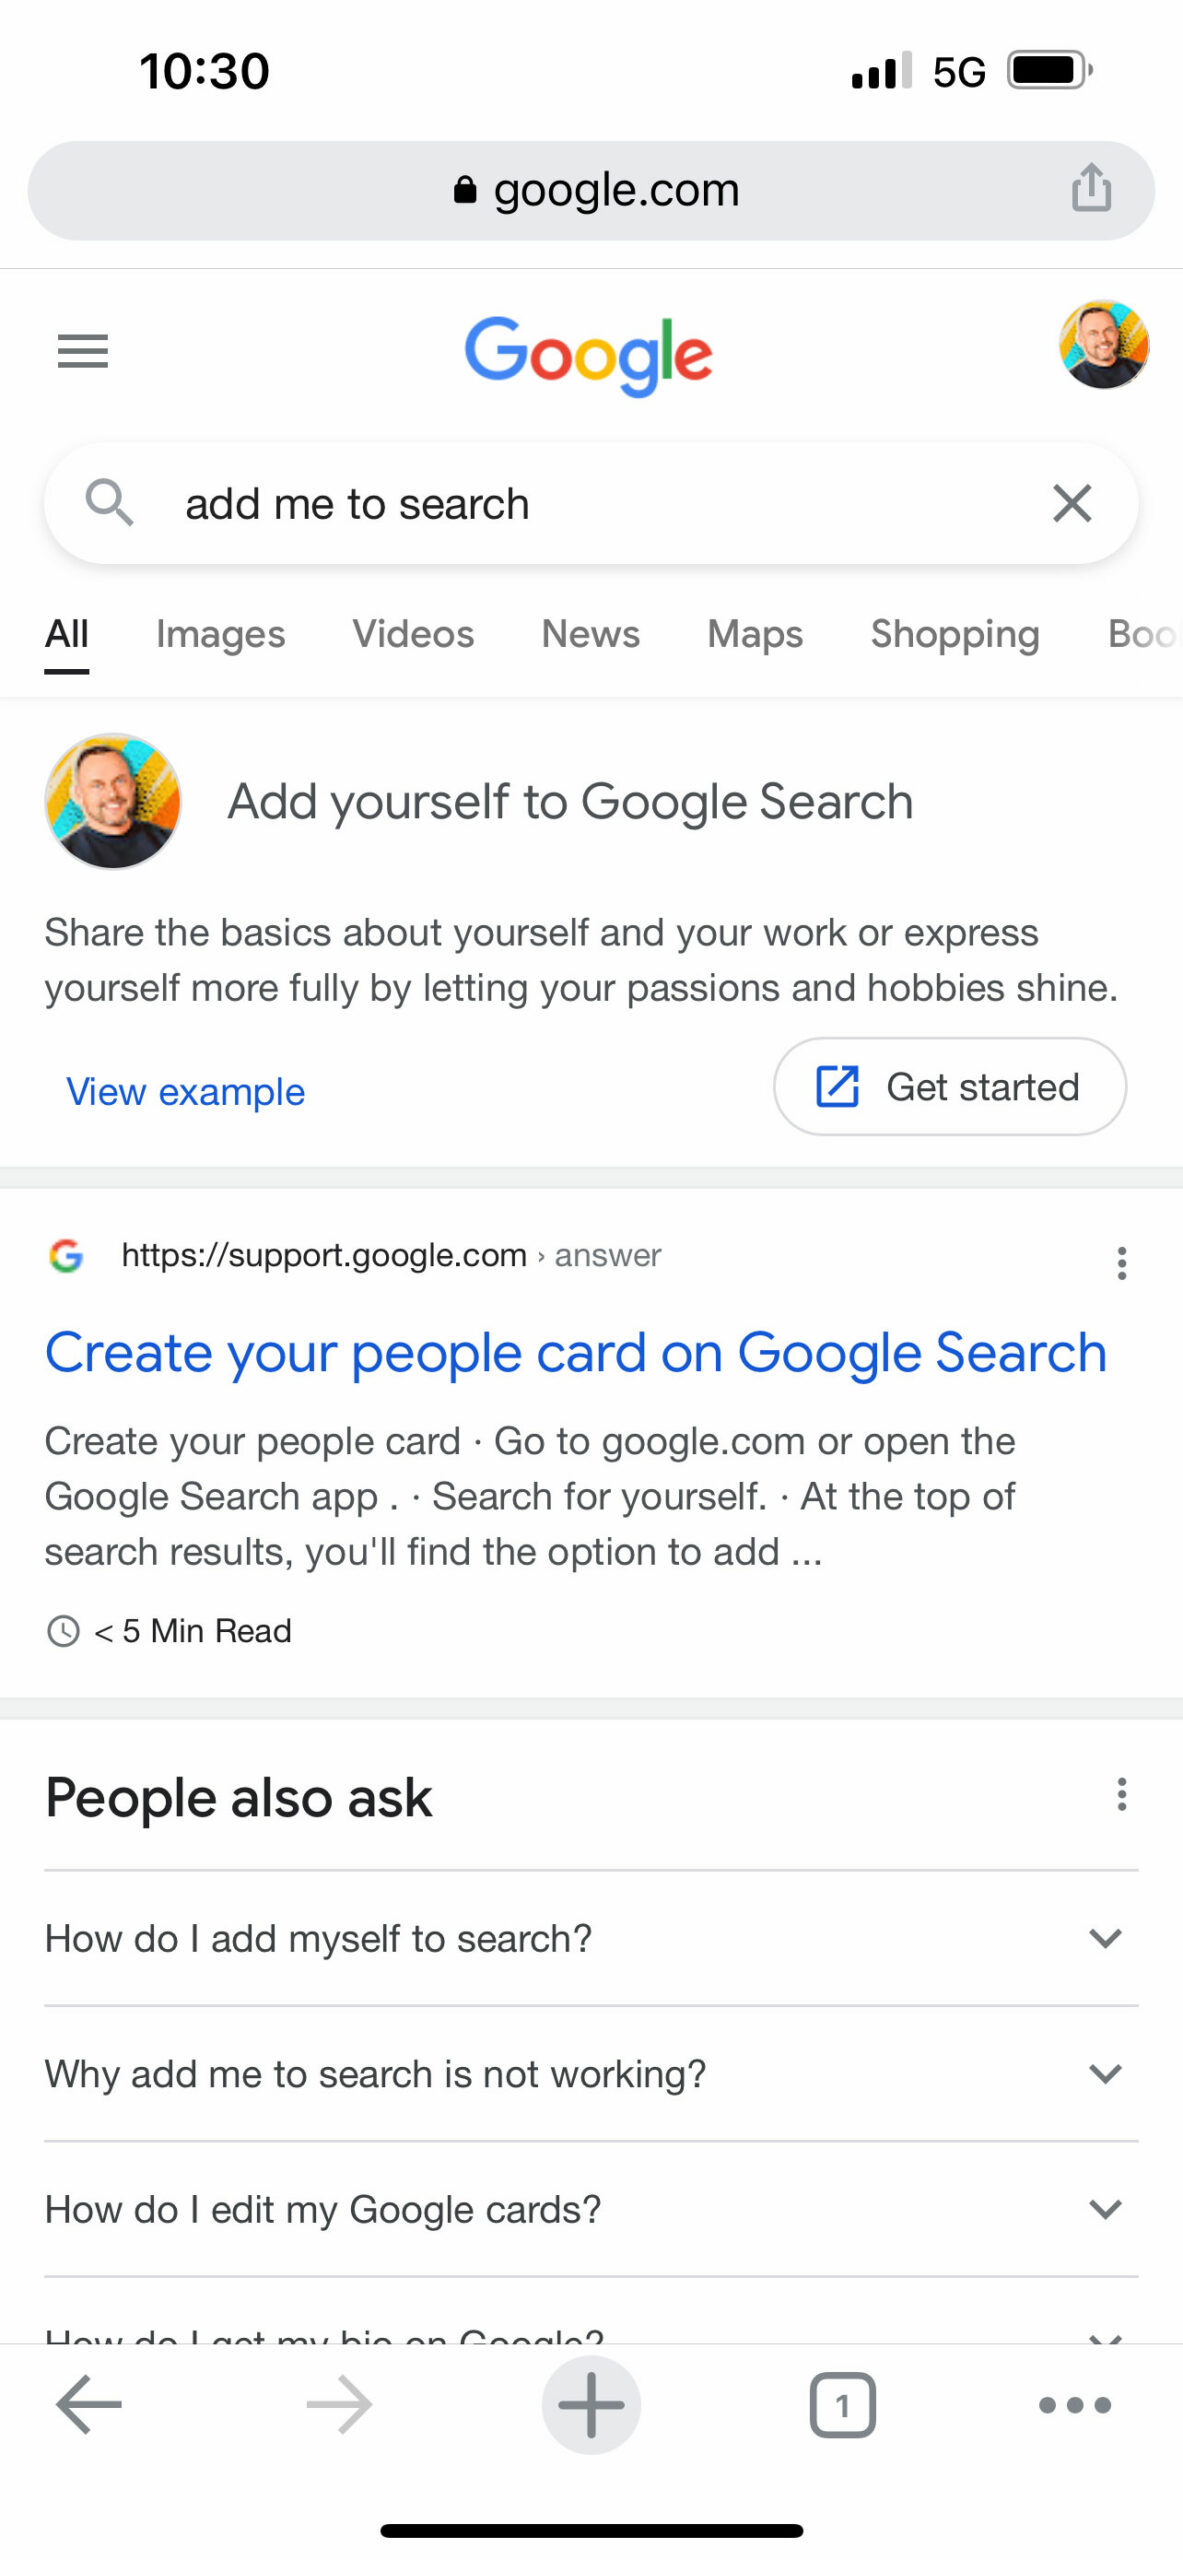 Add yourself to search